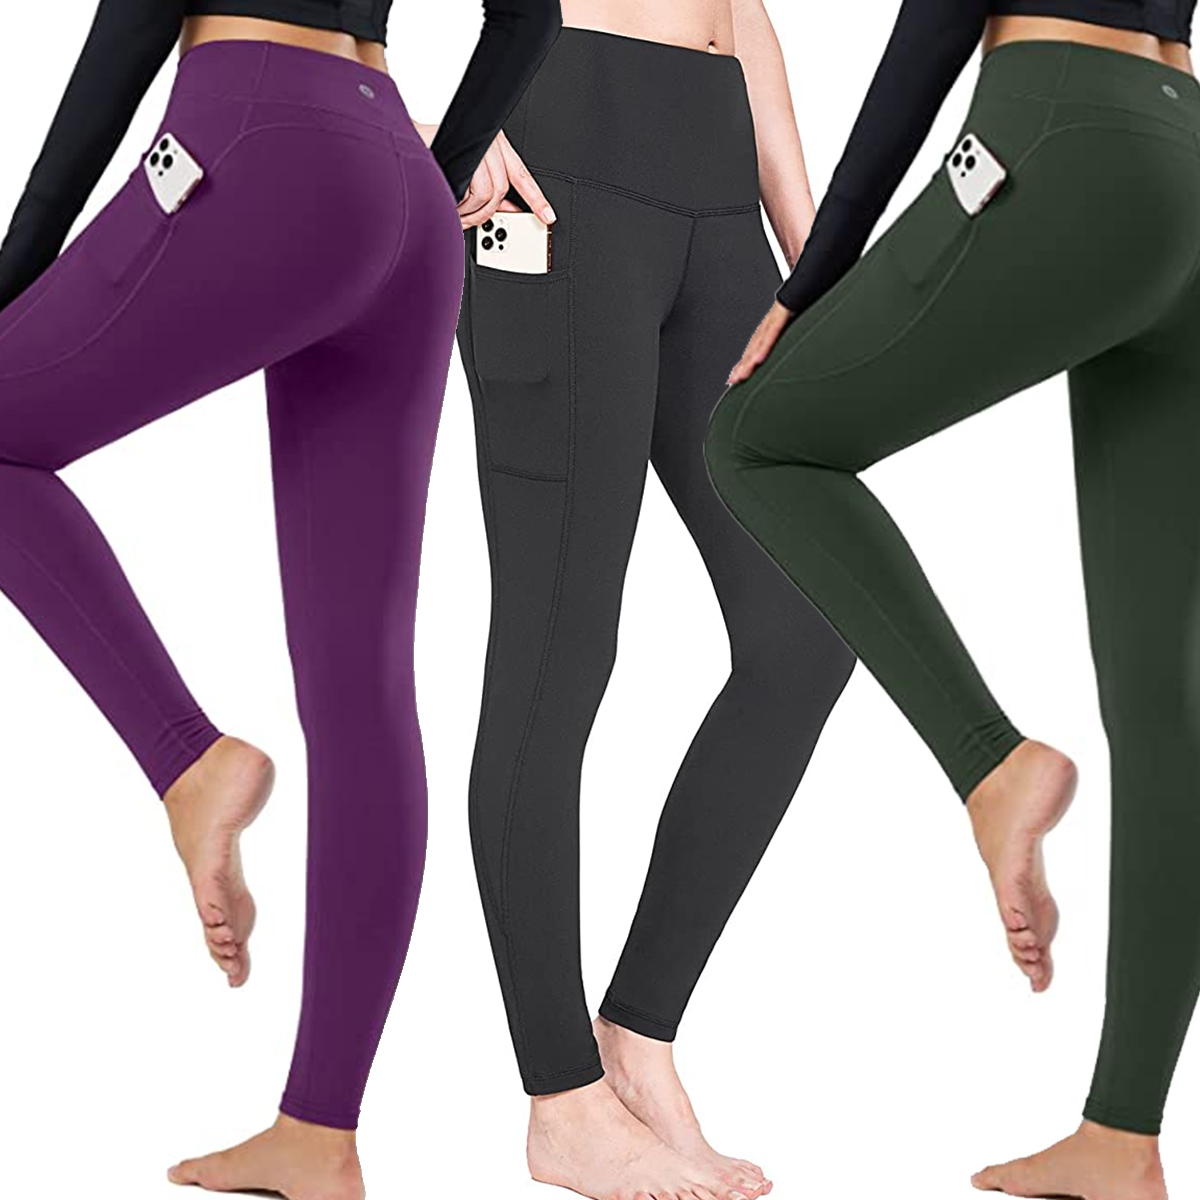 These  Leggings with 63,000+ Perfect Ratings Are on Sale for $12